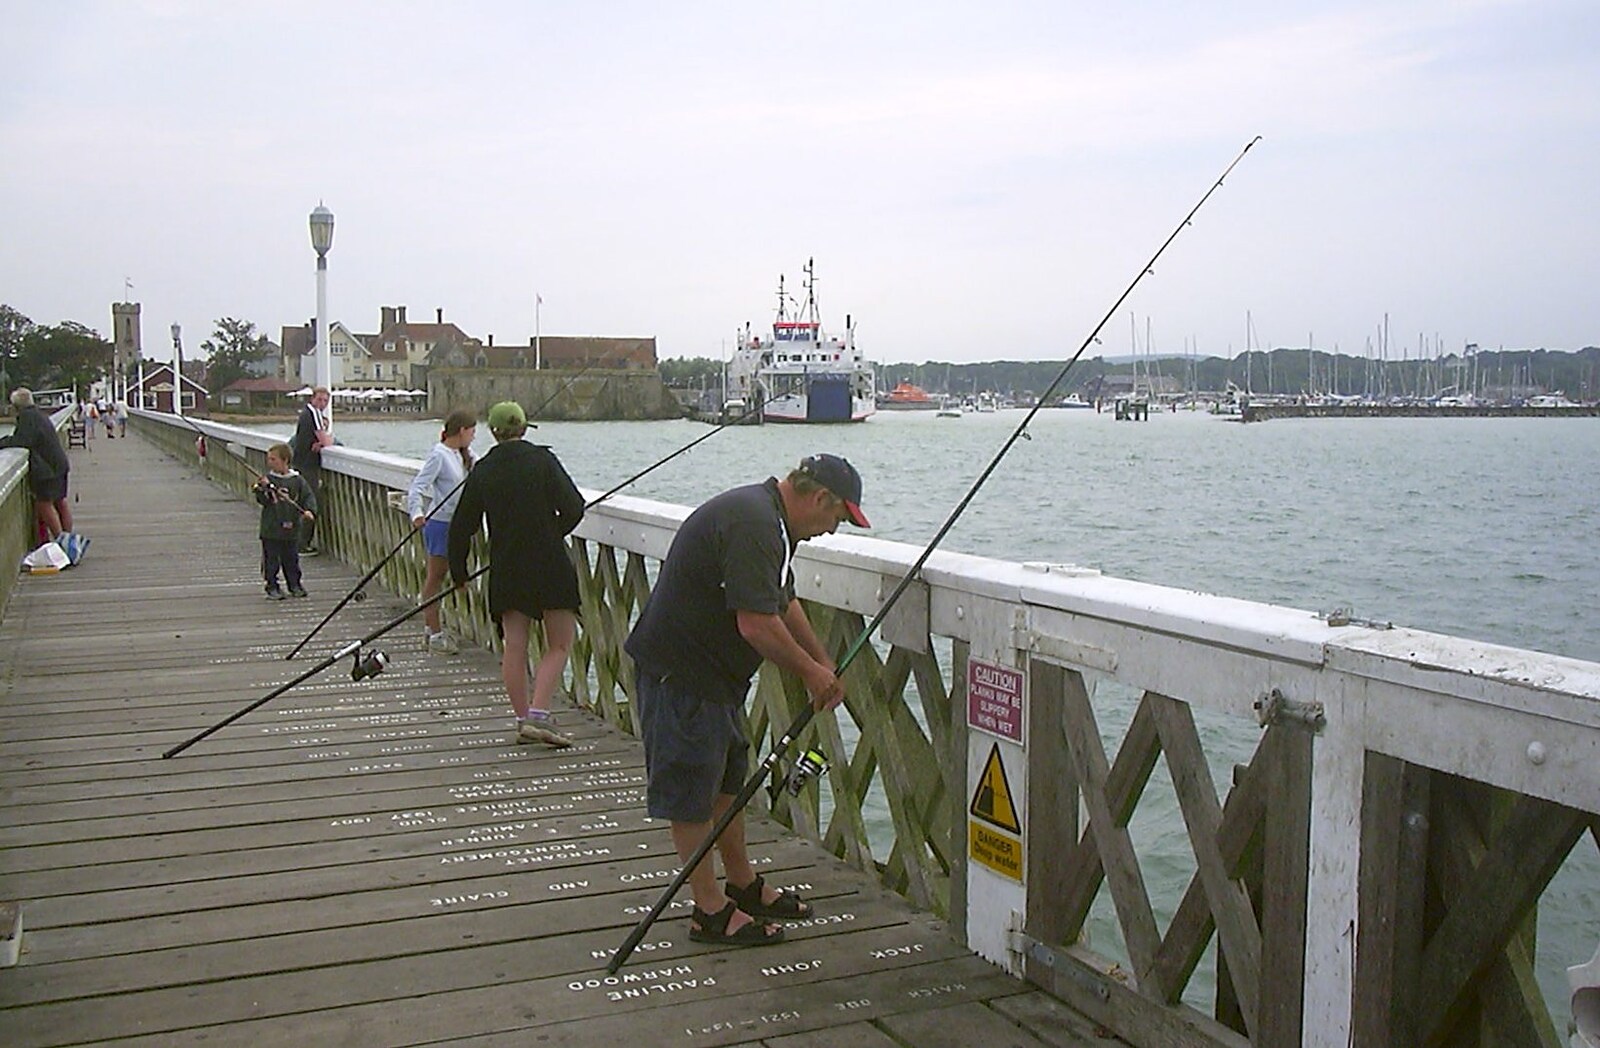 Fishermen do their thing from Cowes Weekend, Cowes, Isle of Wight - 7th August 2004